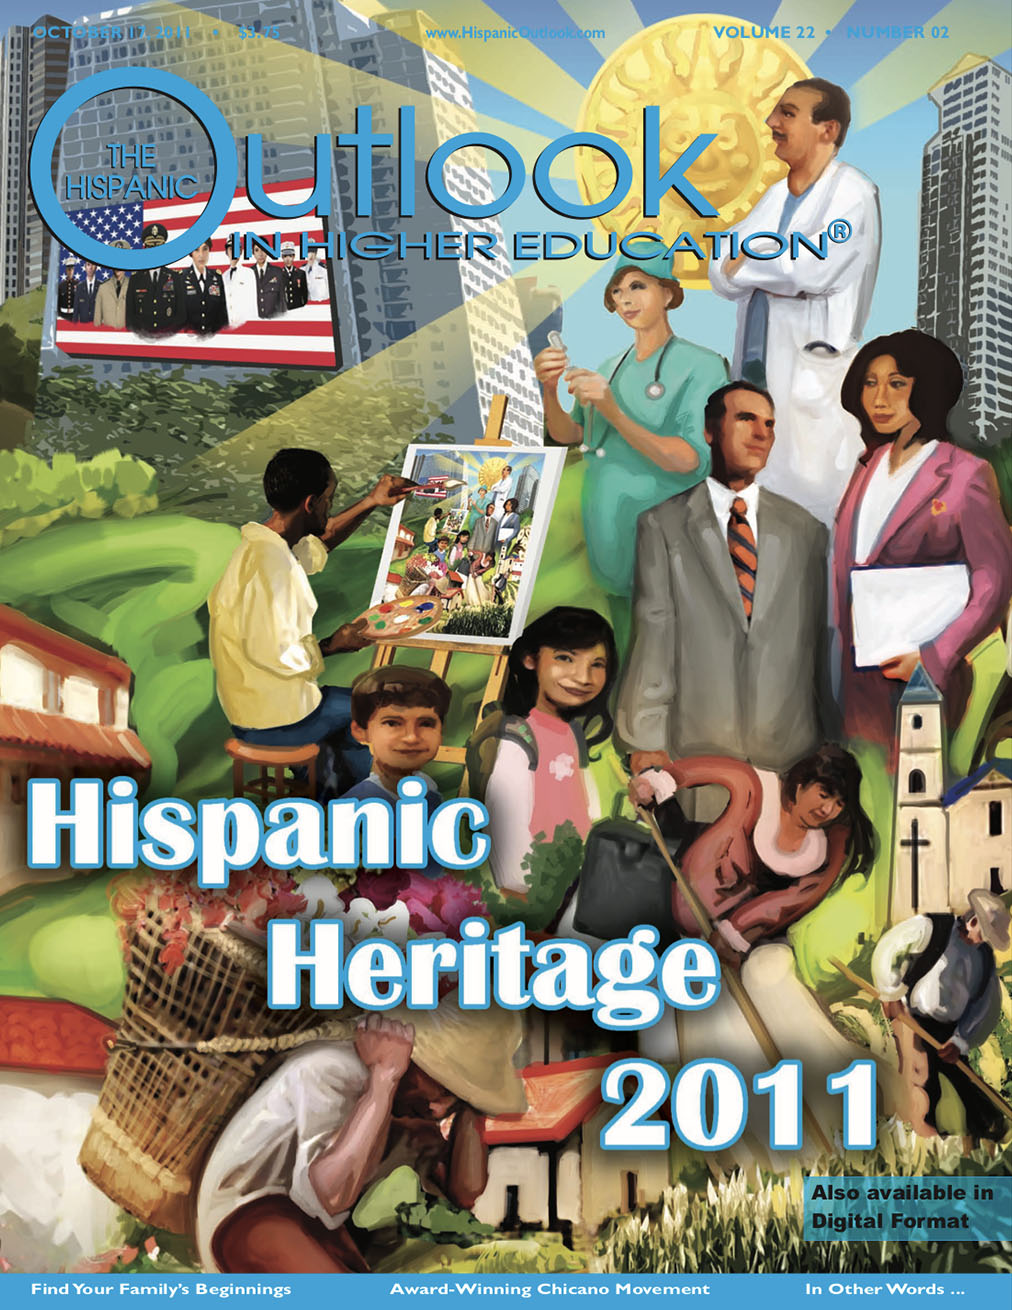 Hispanic Heritage 2011, Find your family's beginnings